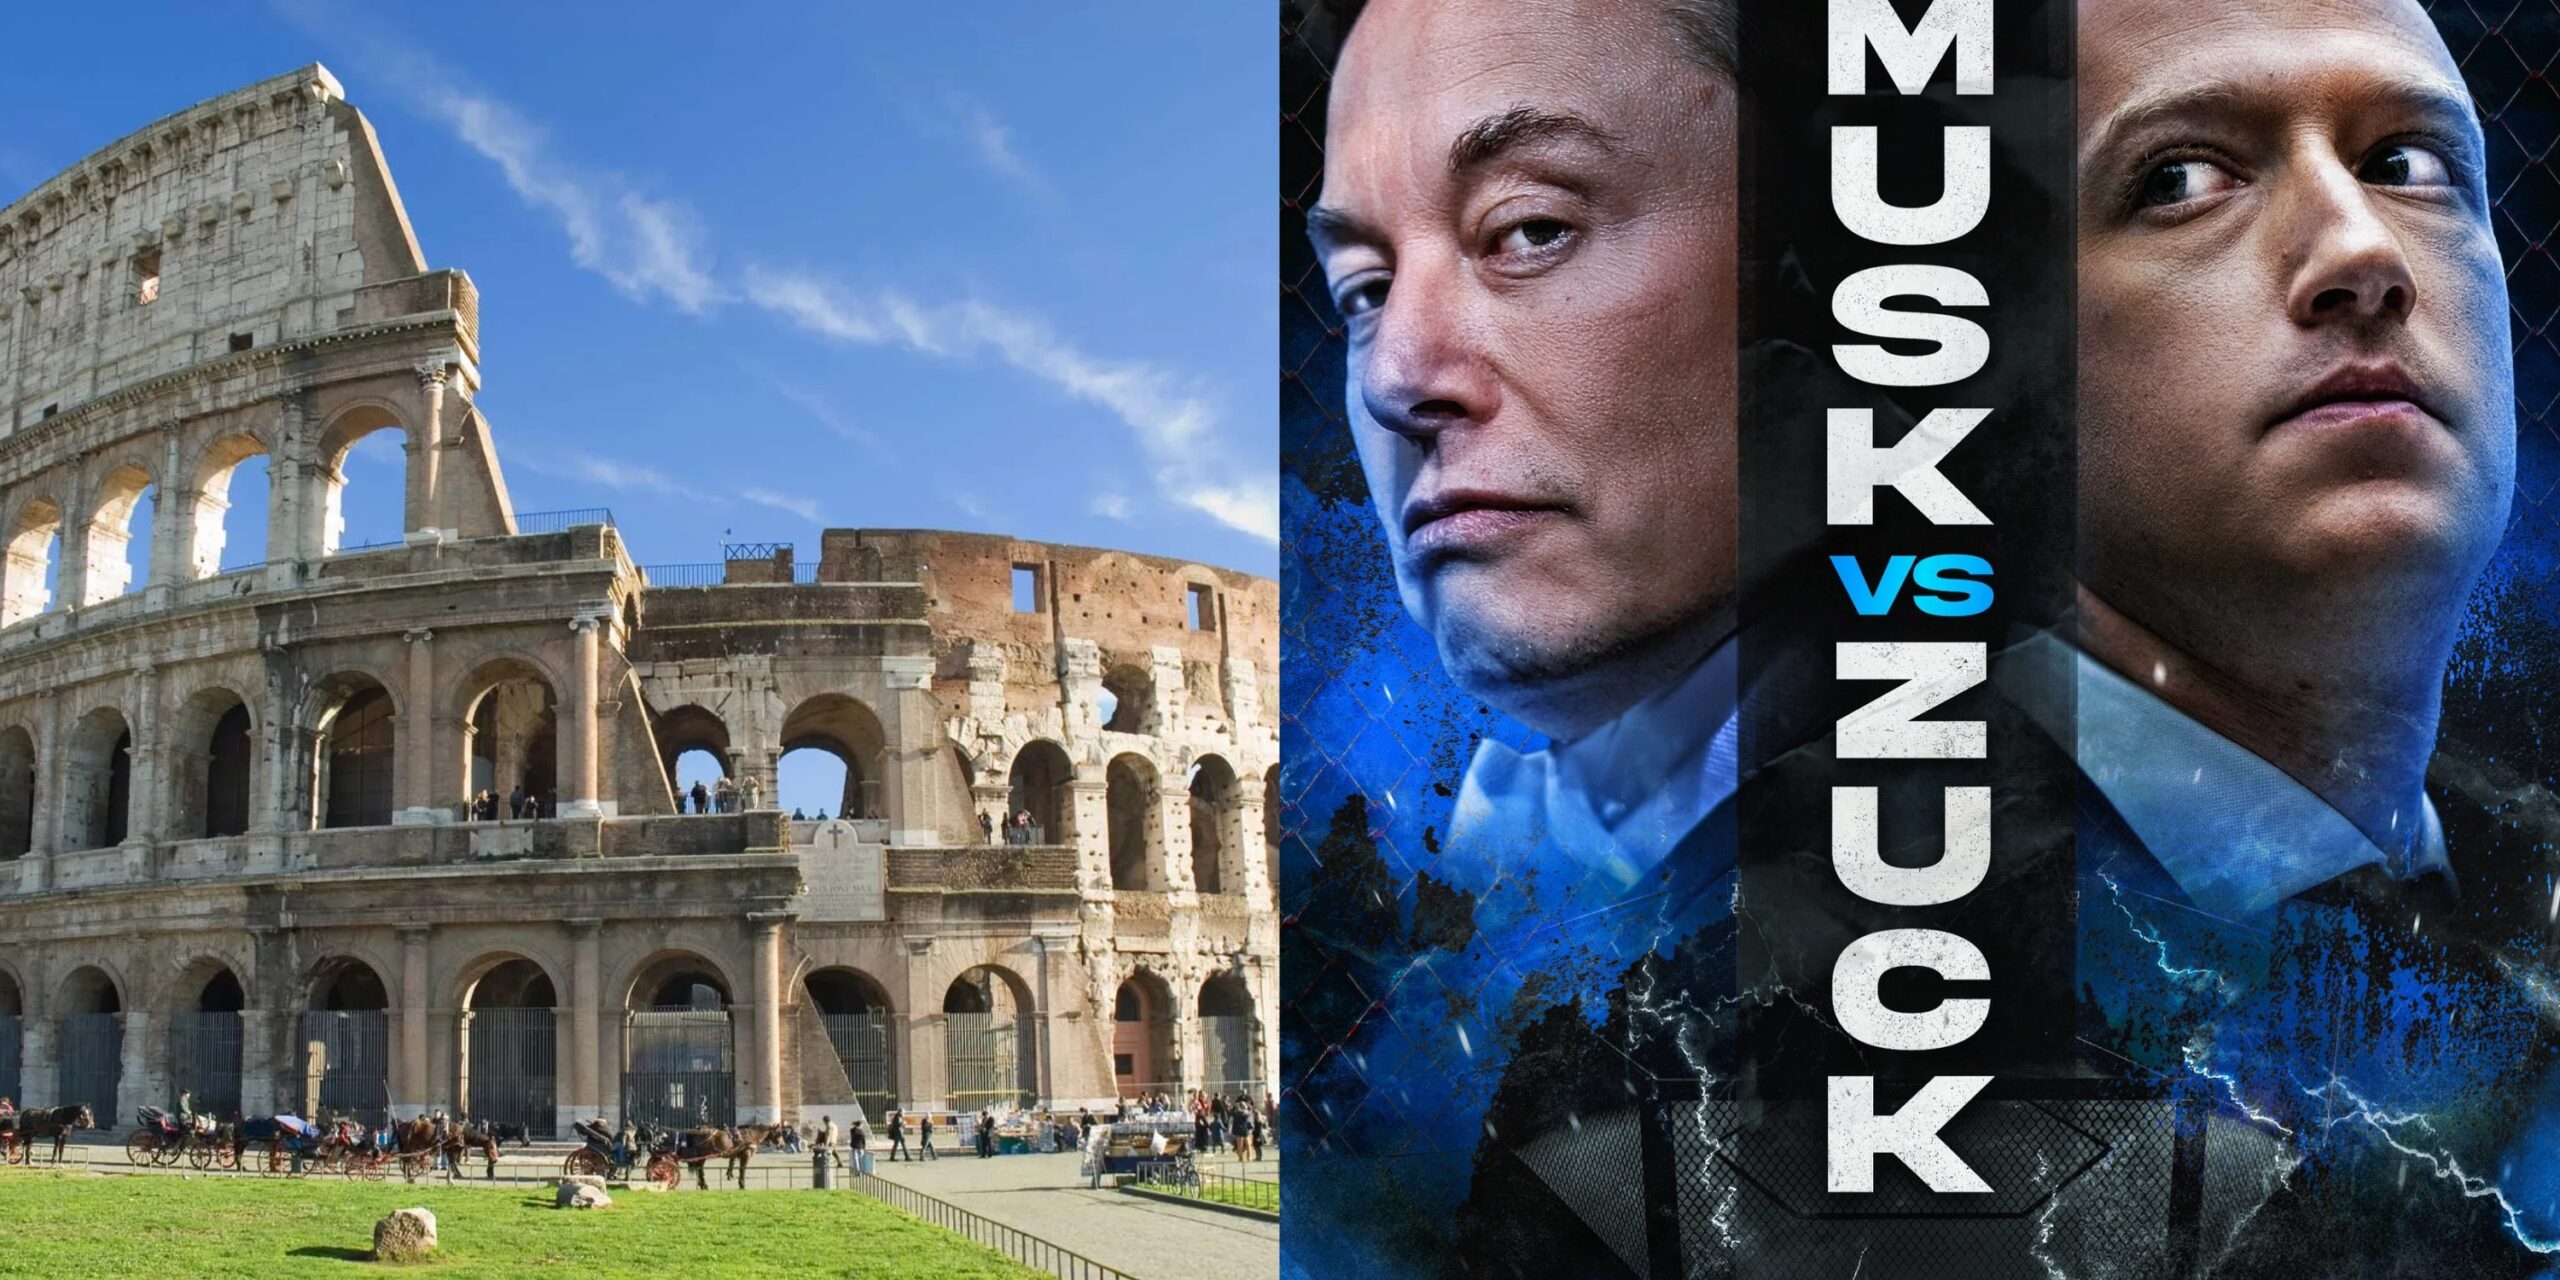 Italy offers over 2000 years old Colosseum as site for Musk and Zuckerberg cage fight